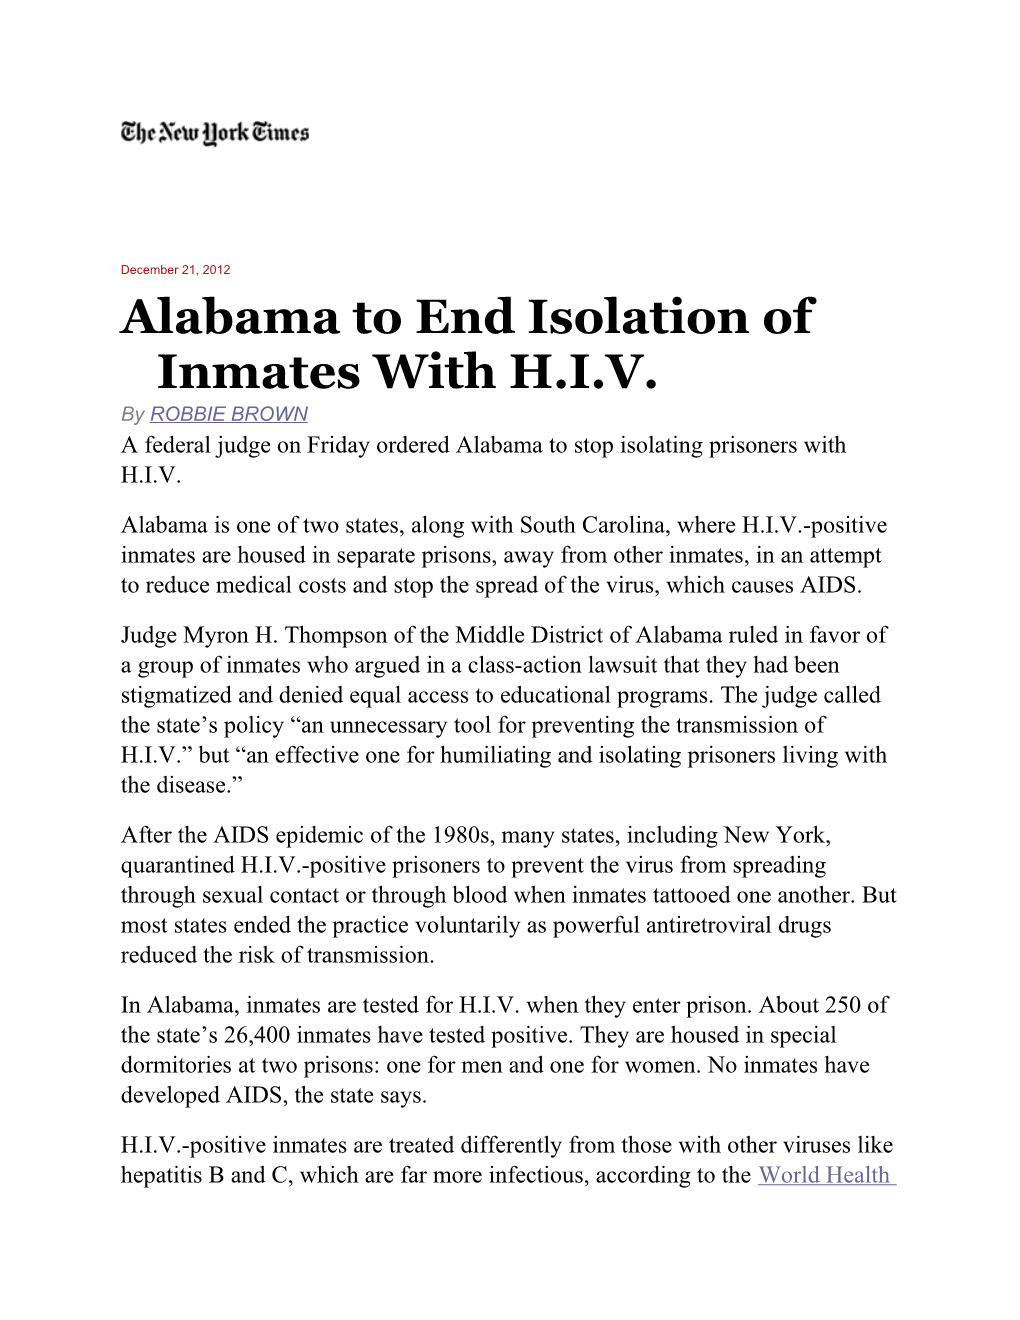 Alabama to End Isolation of Inmates with H.I.V